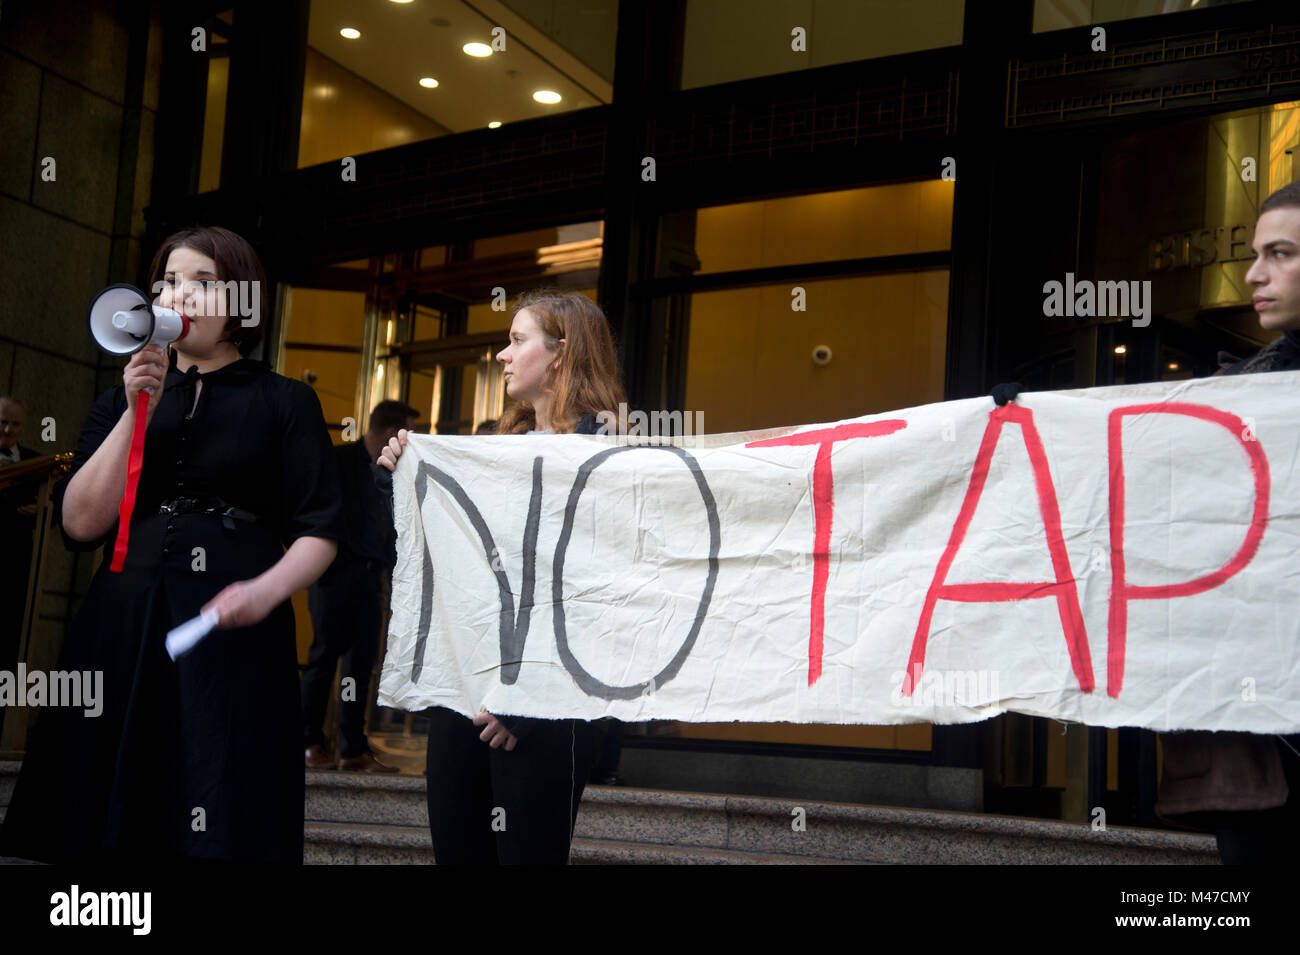 London, UK. 15th February, 2018. Demonstration outside the European Bank for Reconstruction and Development to demand that the bank pledges not to invest in the Trans-Adriatic Pipeline (TAP). On February 17th 2018 the EBRD will close its public consultation and decide whether to give 500 million Euros to the pipeline that aims to bring gas from Azerbijan to Europe. Credit: Jenny Matthews/Alamy Live News Stock Photo